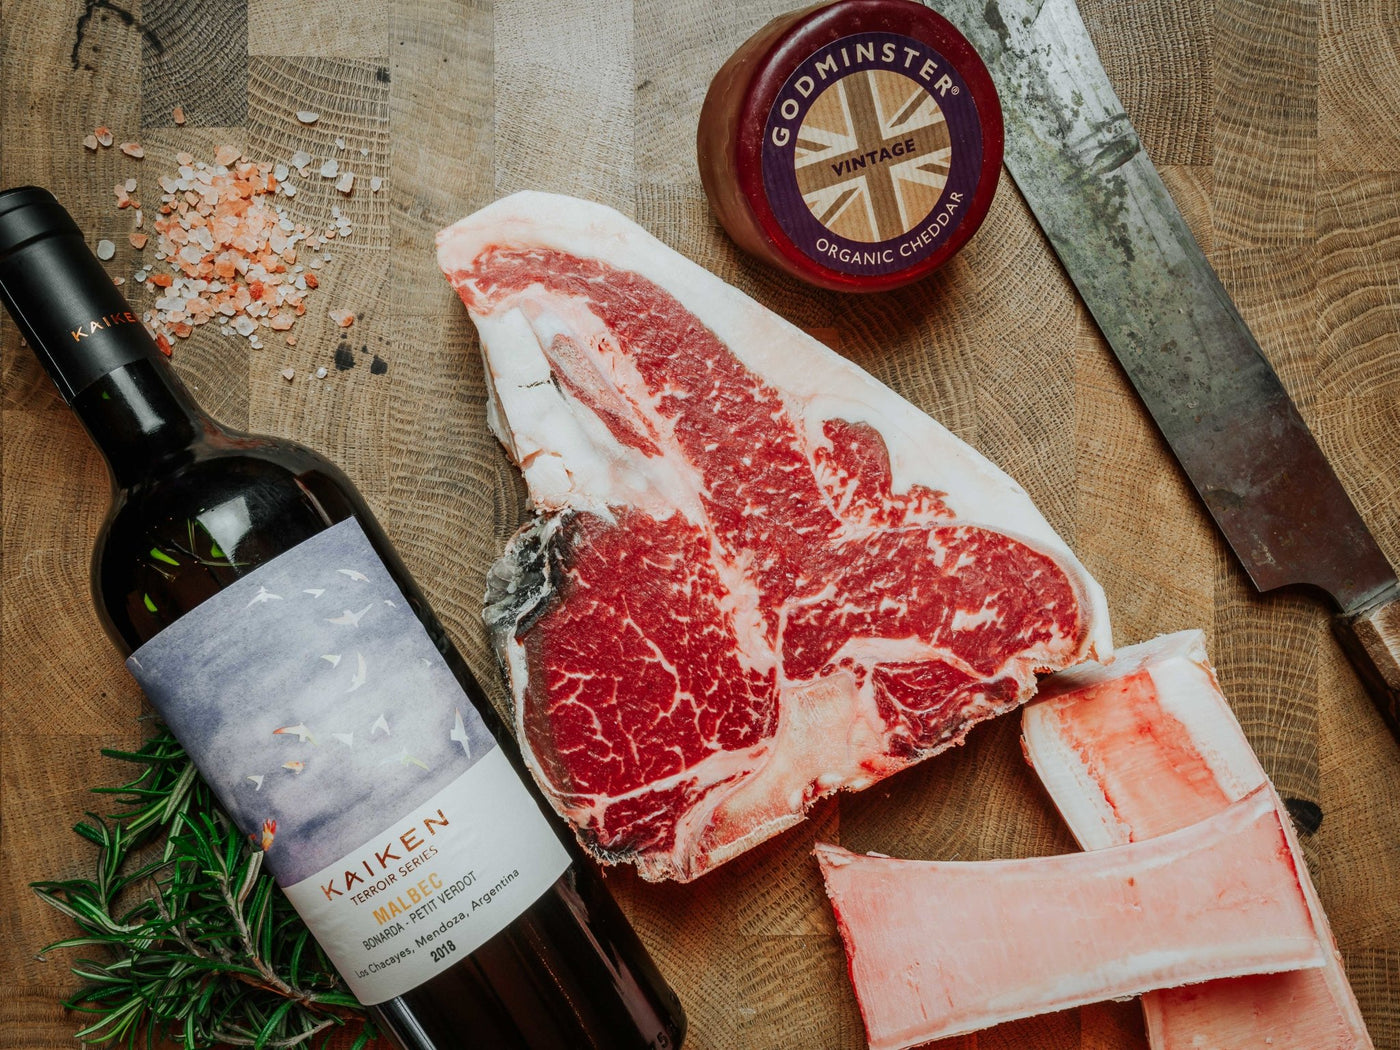 45 Day Dry-Aged Porterhouse Valentine's Day Box - Thomas Joseph Butchery - Ethical Dry-Aged Meat The Best Steak UK Thomas Joseph Butchery